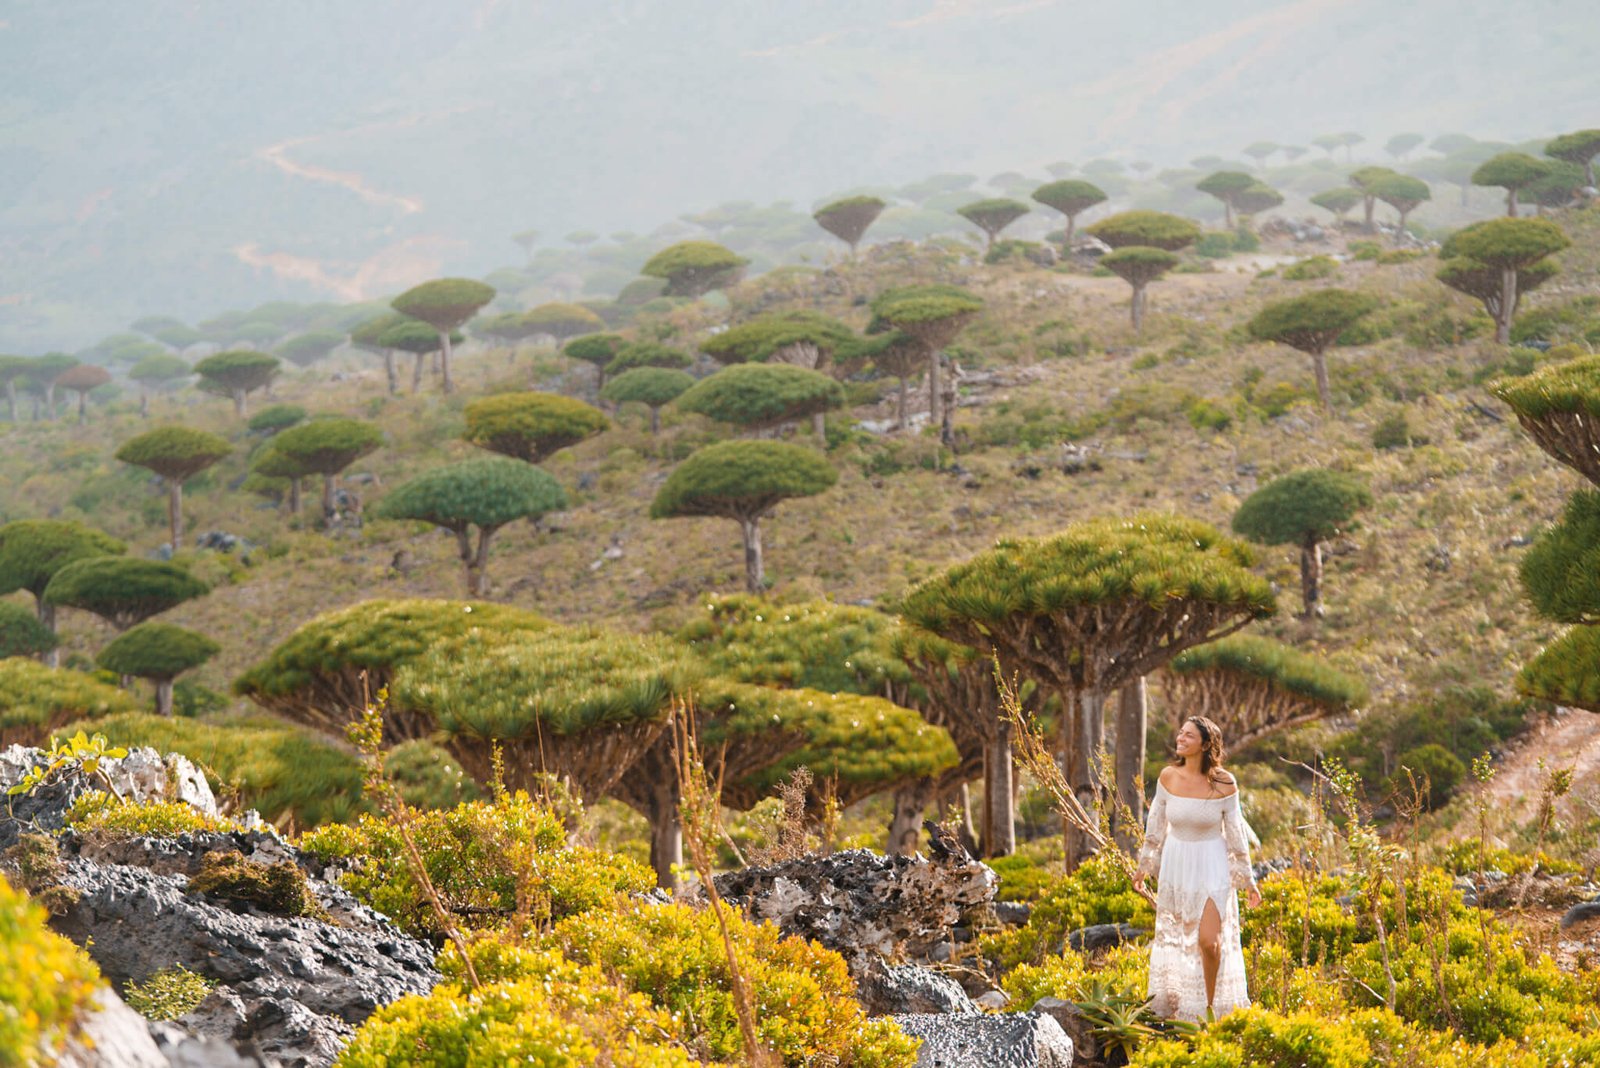 Dragon blood trees on the Socotra island tour